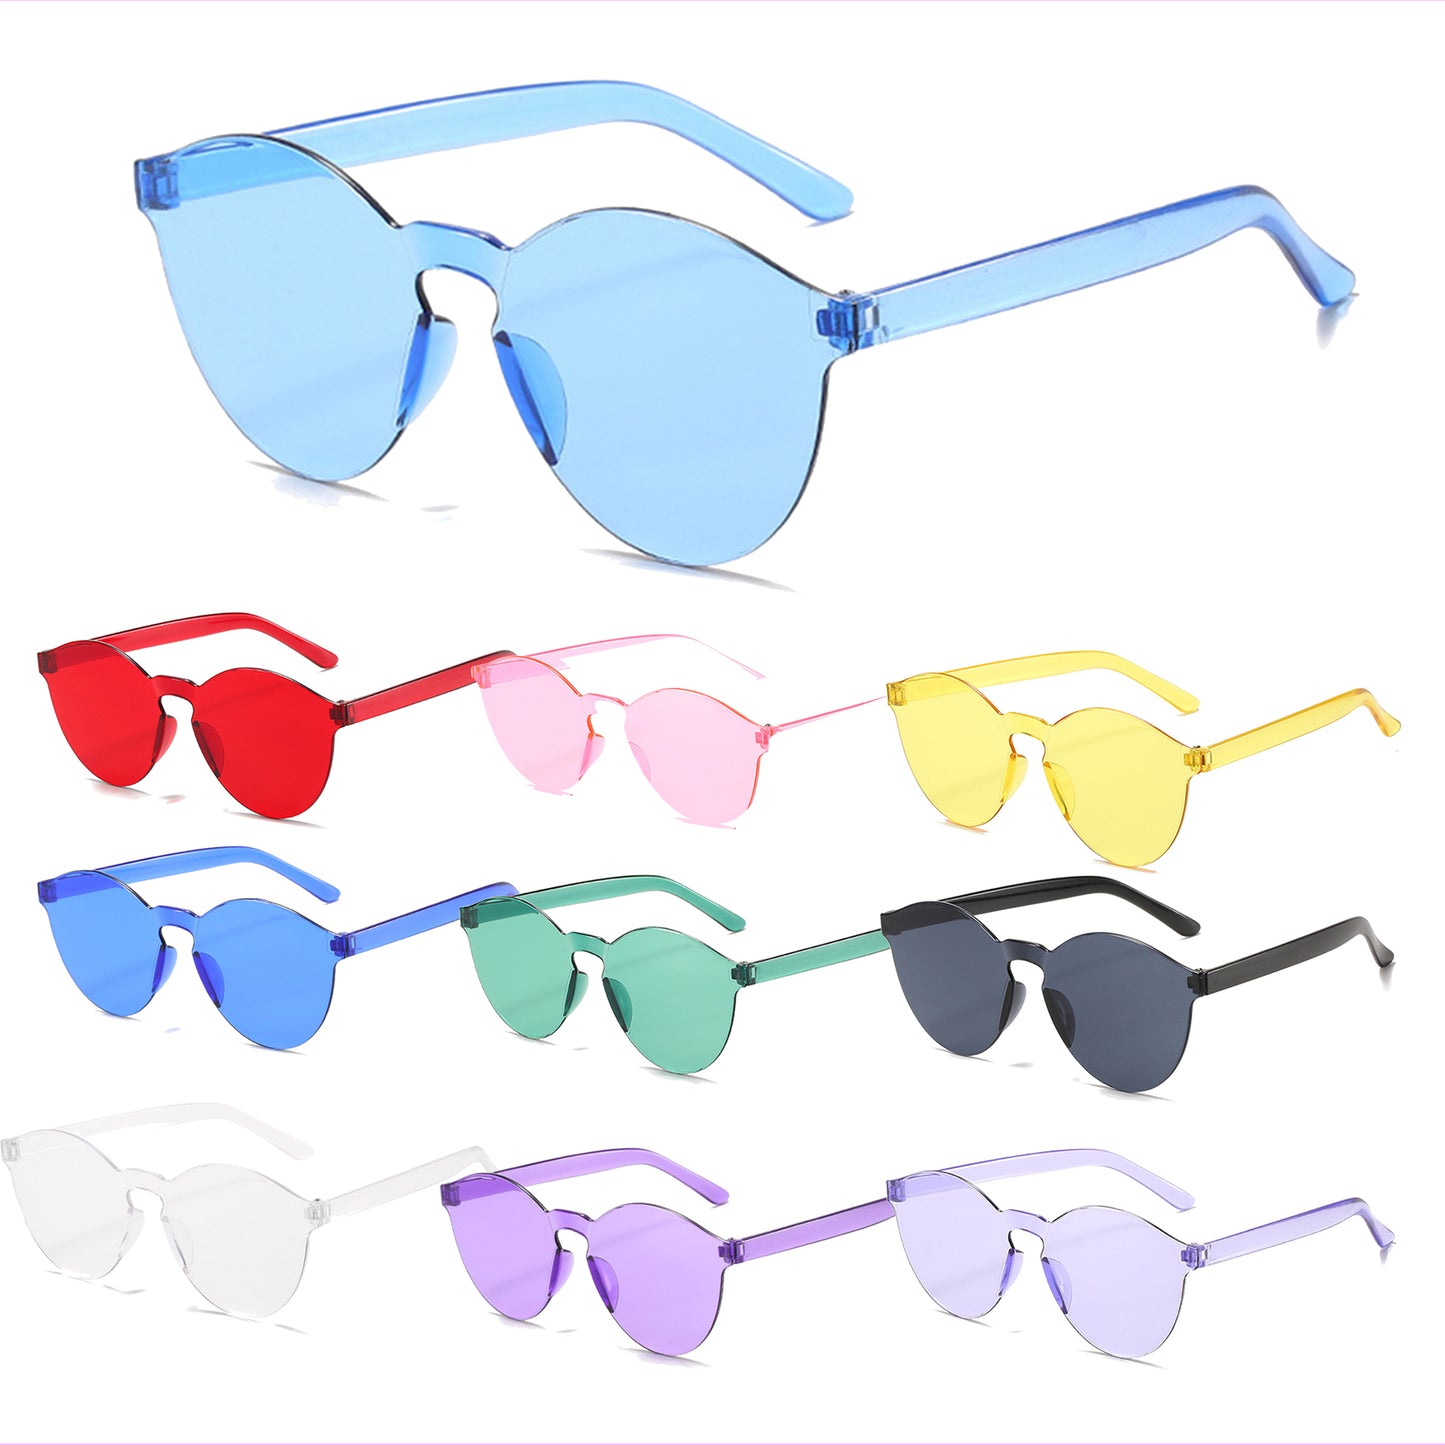 Clear One Collar UV400 Sunglass - YOUAREMYPOISON